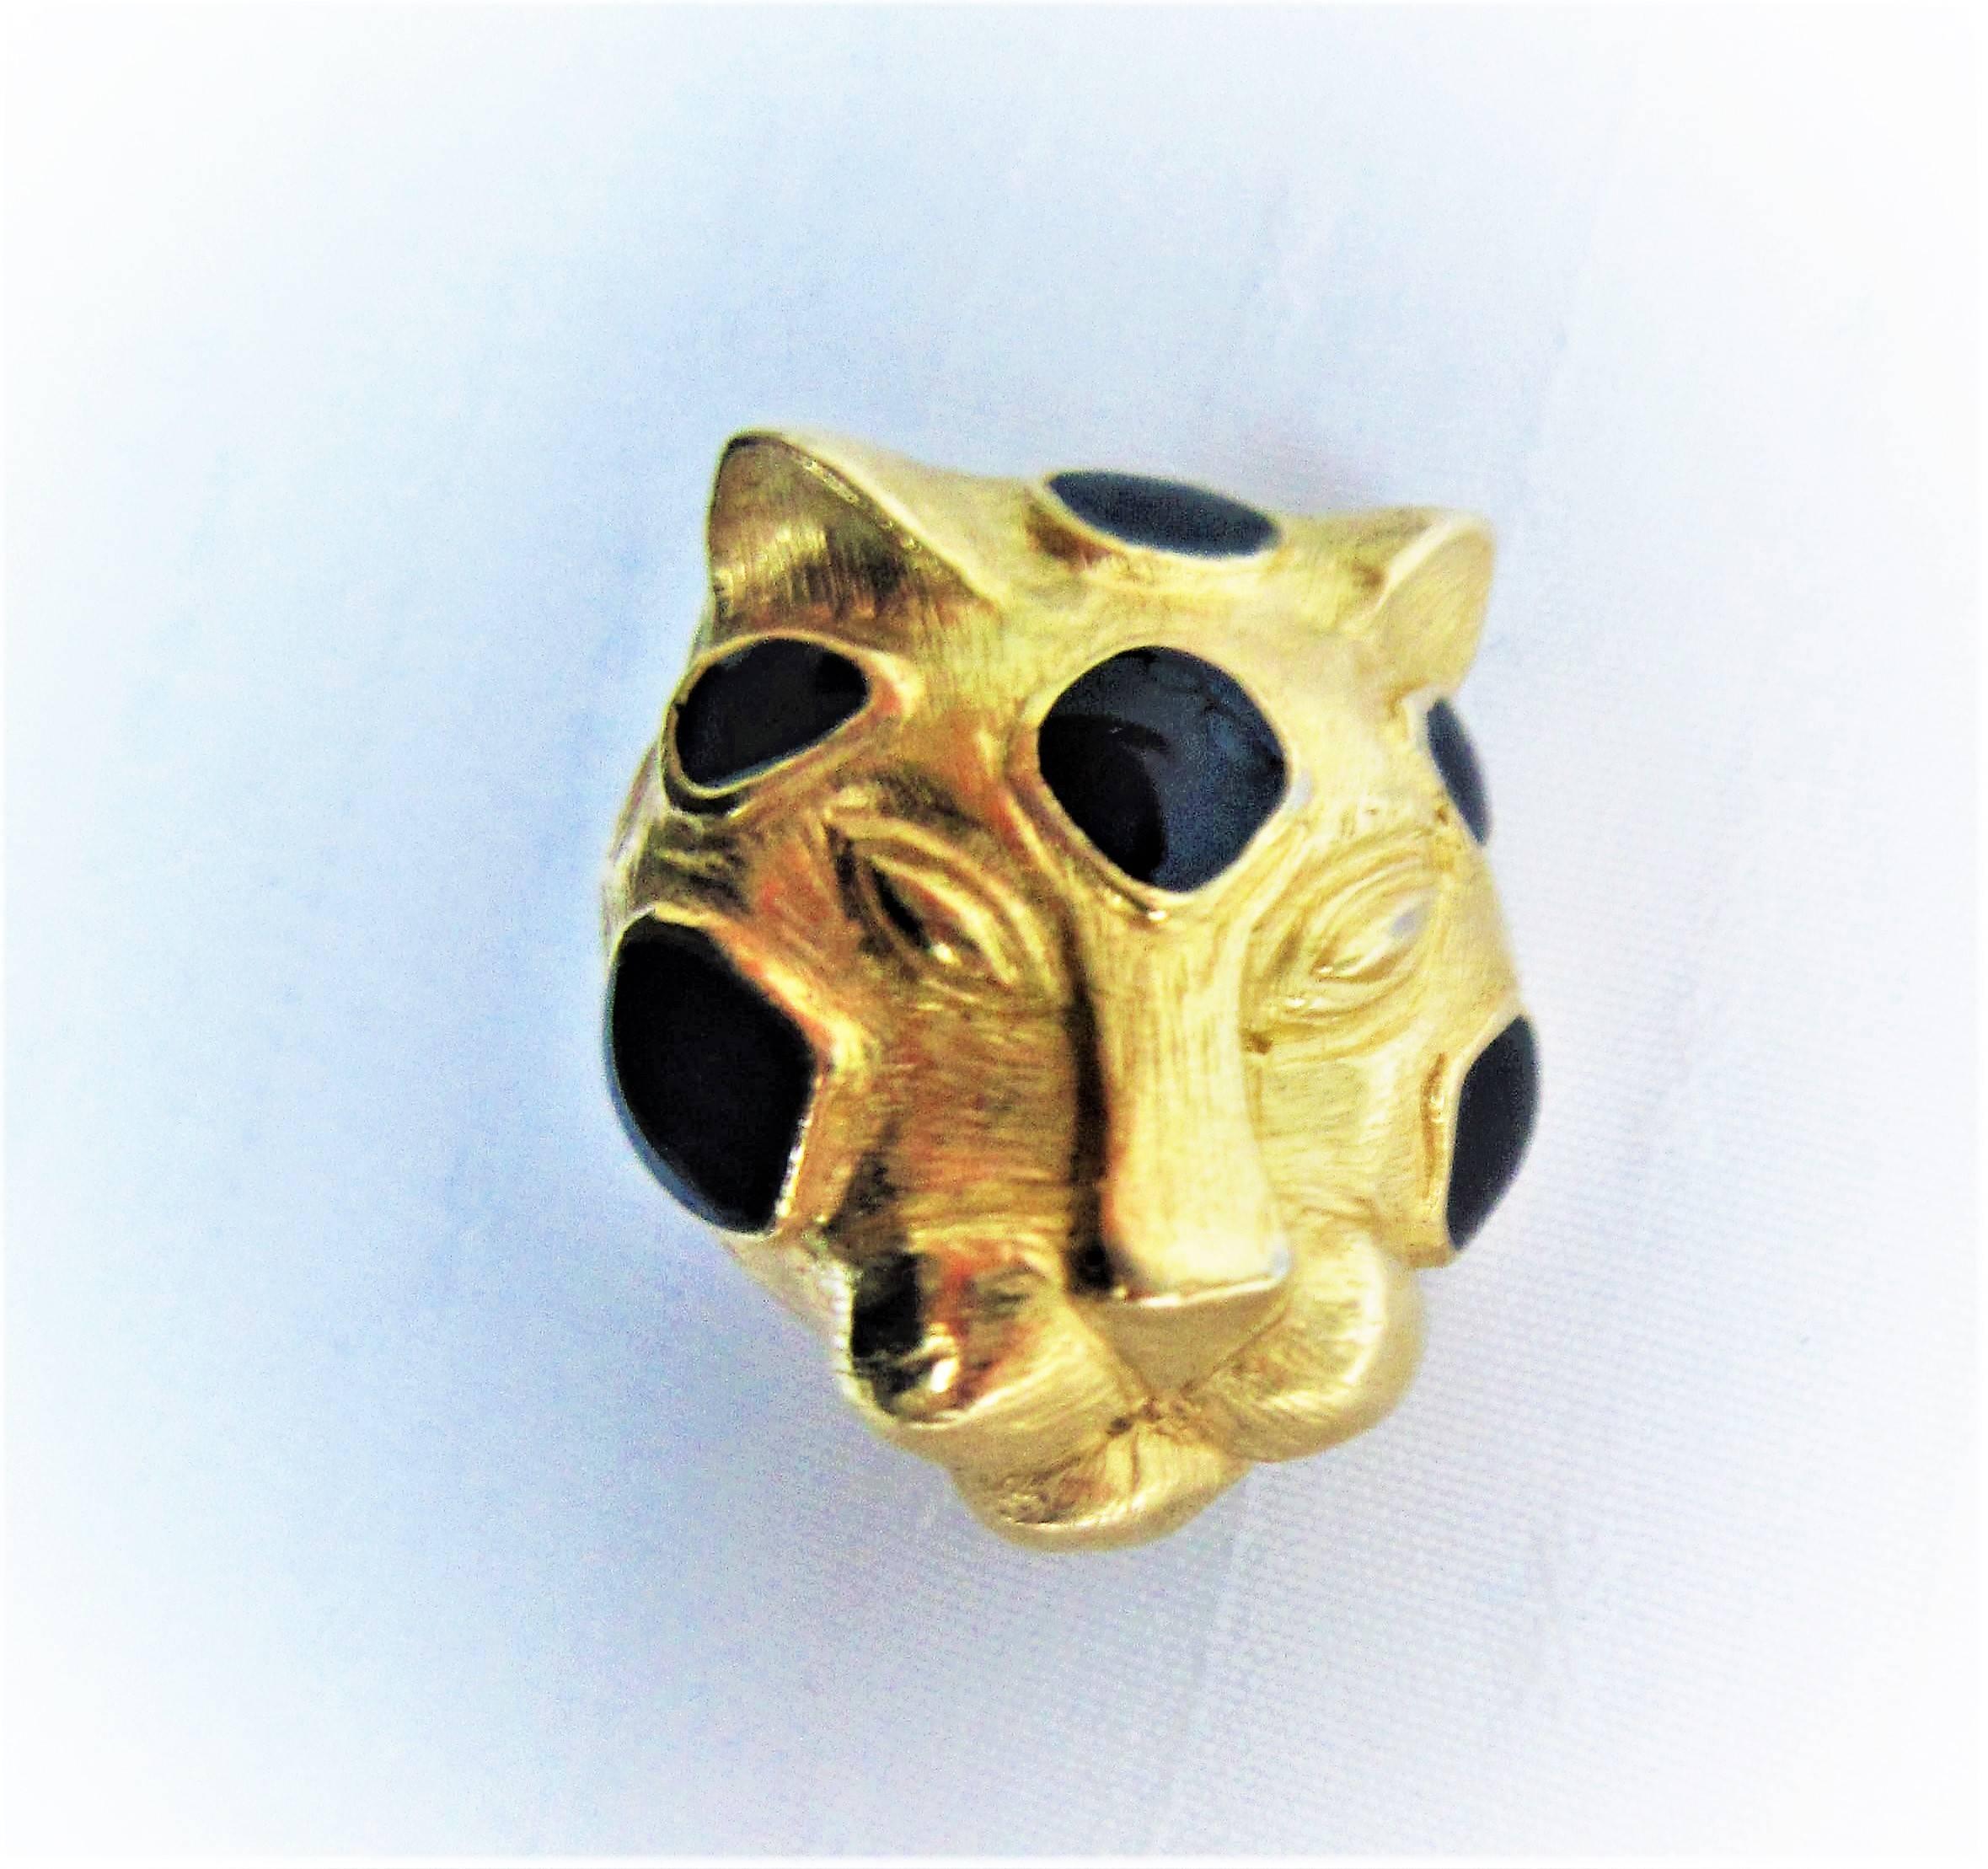 Vintage signed Trifari figural leopard clip on earrings, gold tone metal, black enamel.

They come with the original box

Brand: Trifari

Material: gold tone metal, enamel.

Condition: Good Conditions, Some light signs of wear

Approx.